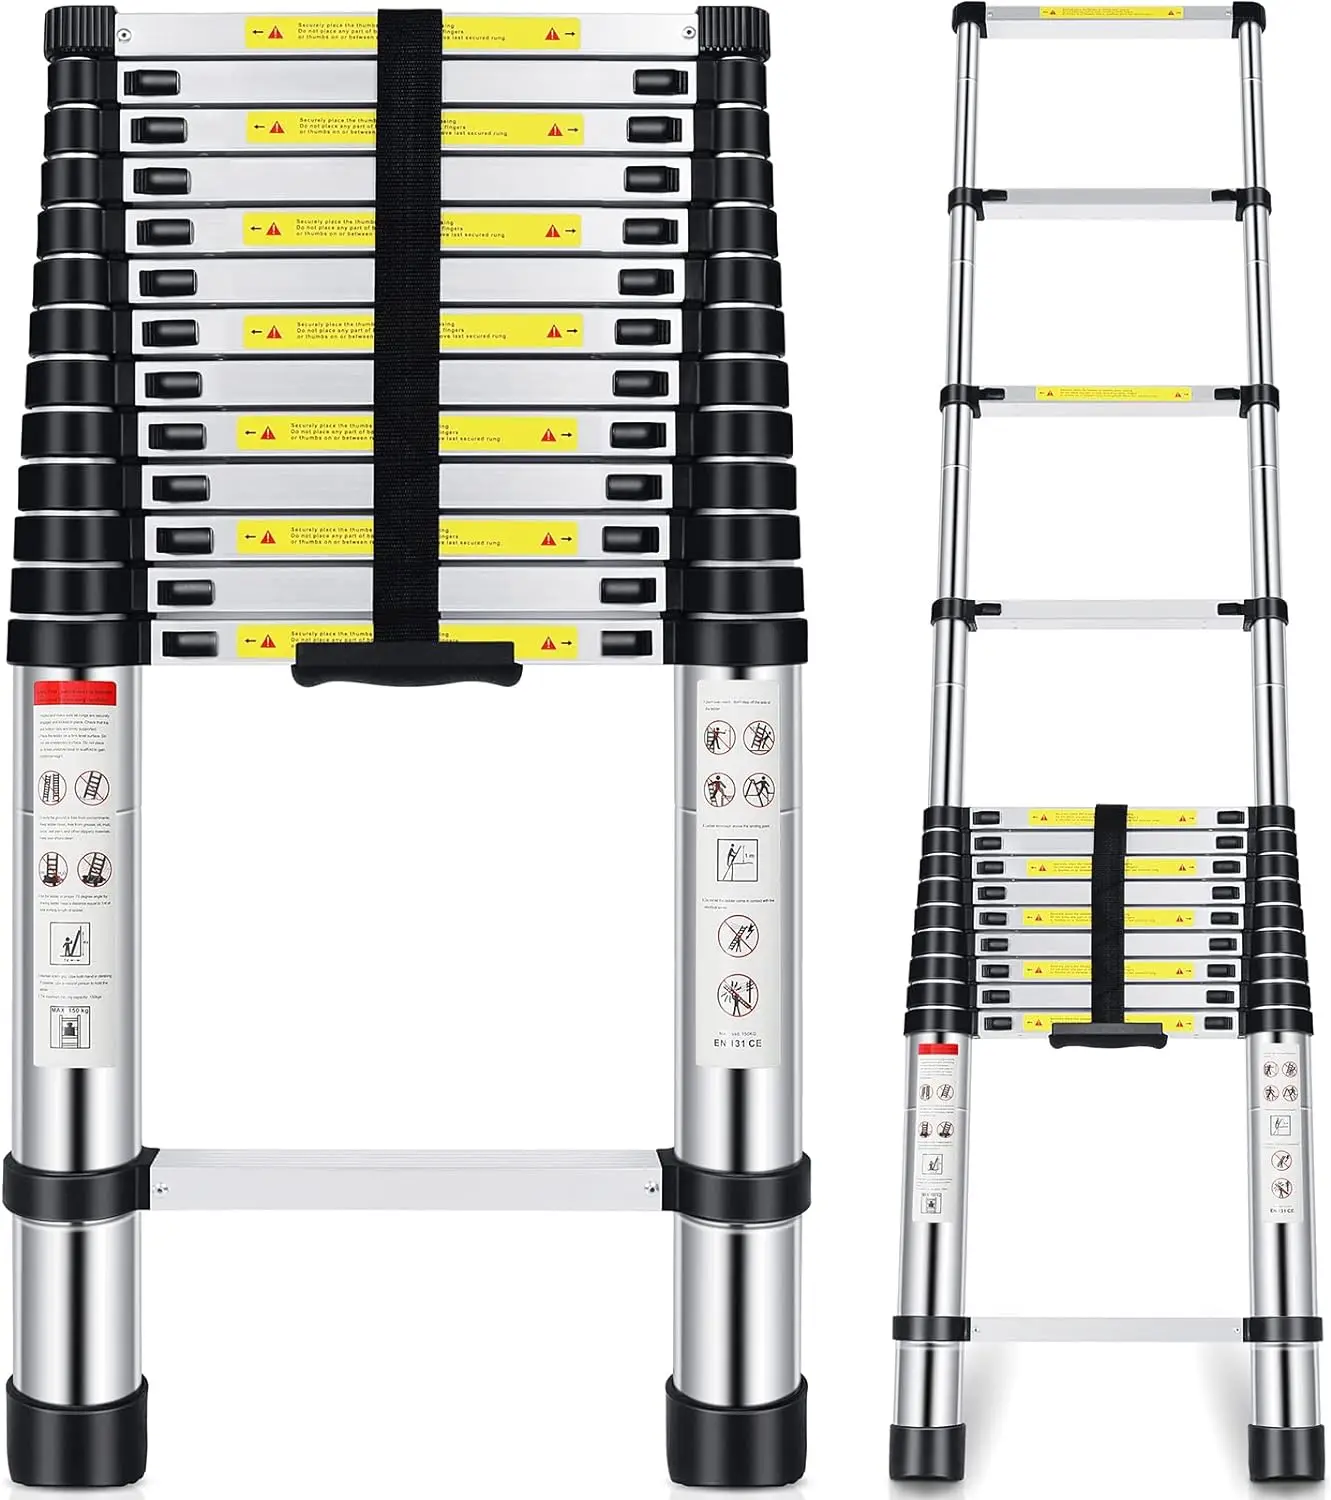 

Telescoping Extension Ladder 16.5 FT Aluminum Alloy Folding Telescopic Ladder with Locking Mechanism Heavy Duty 330 lbs Load